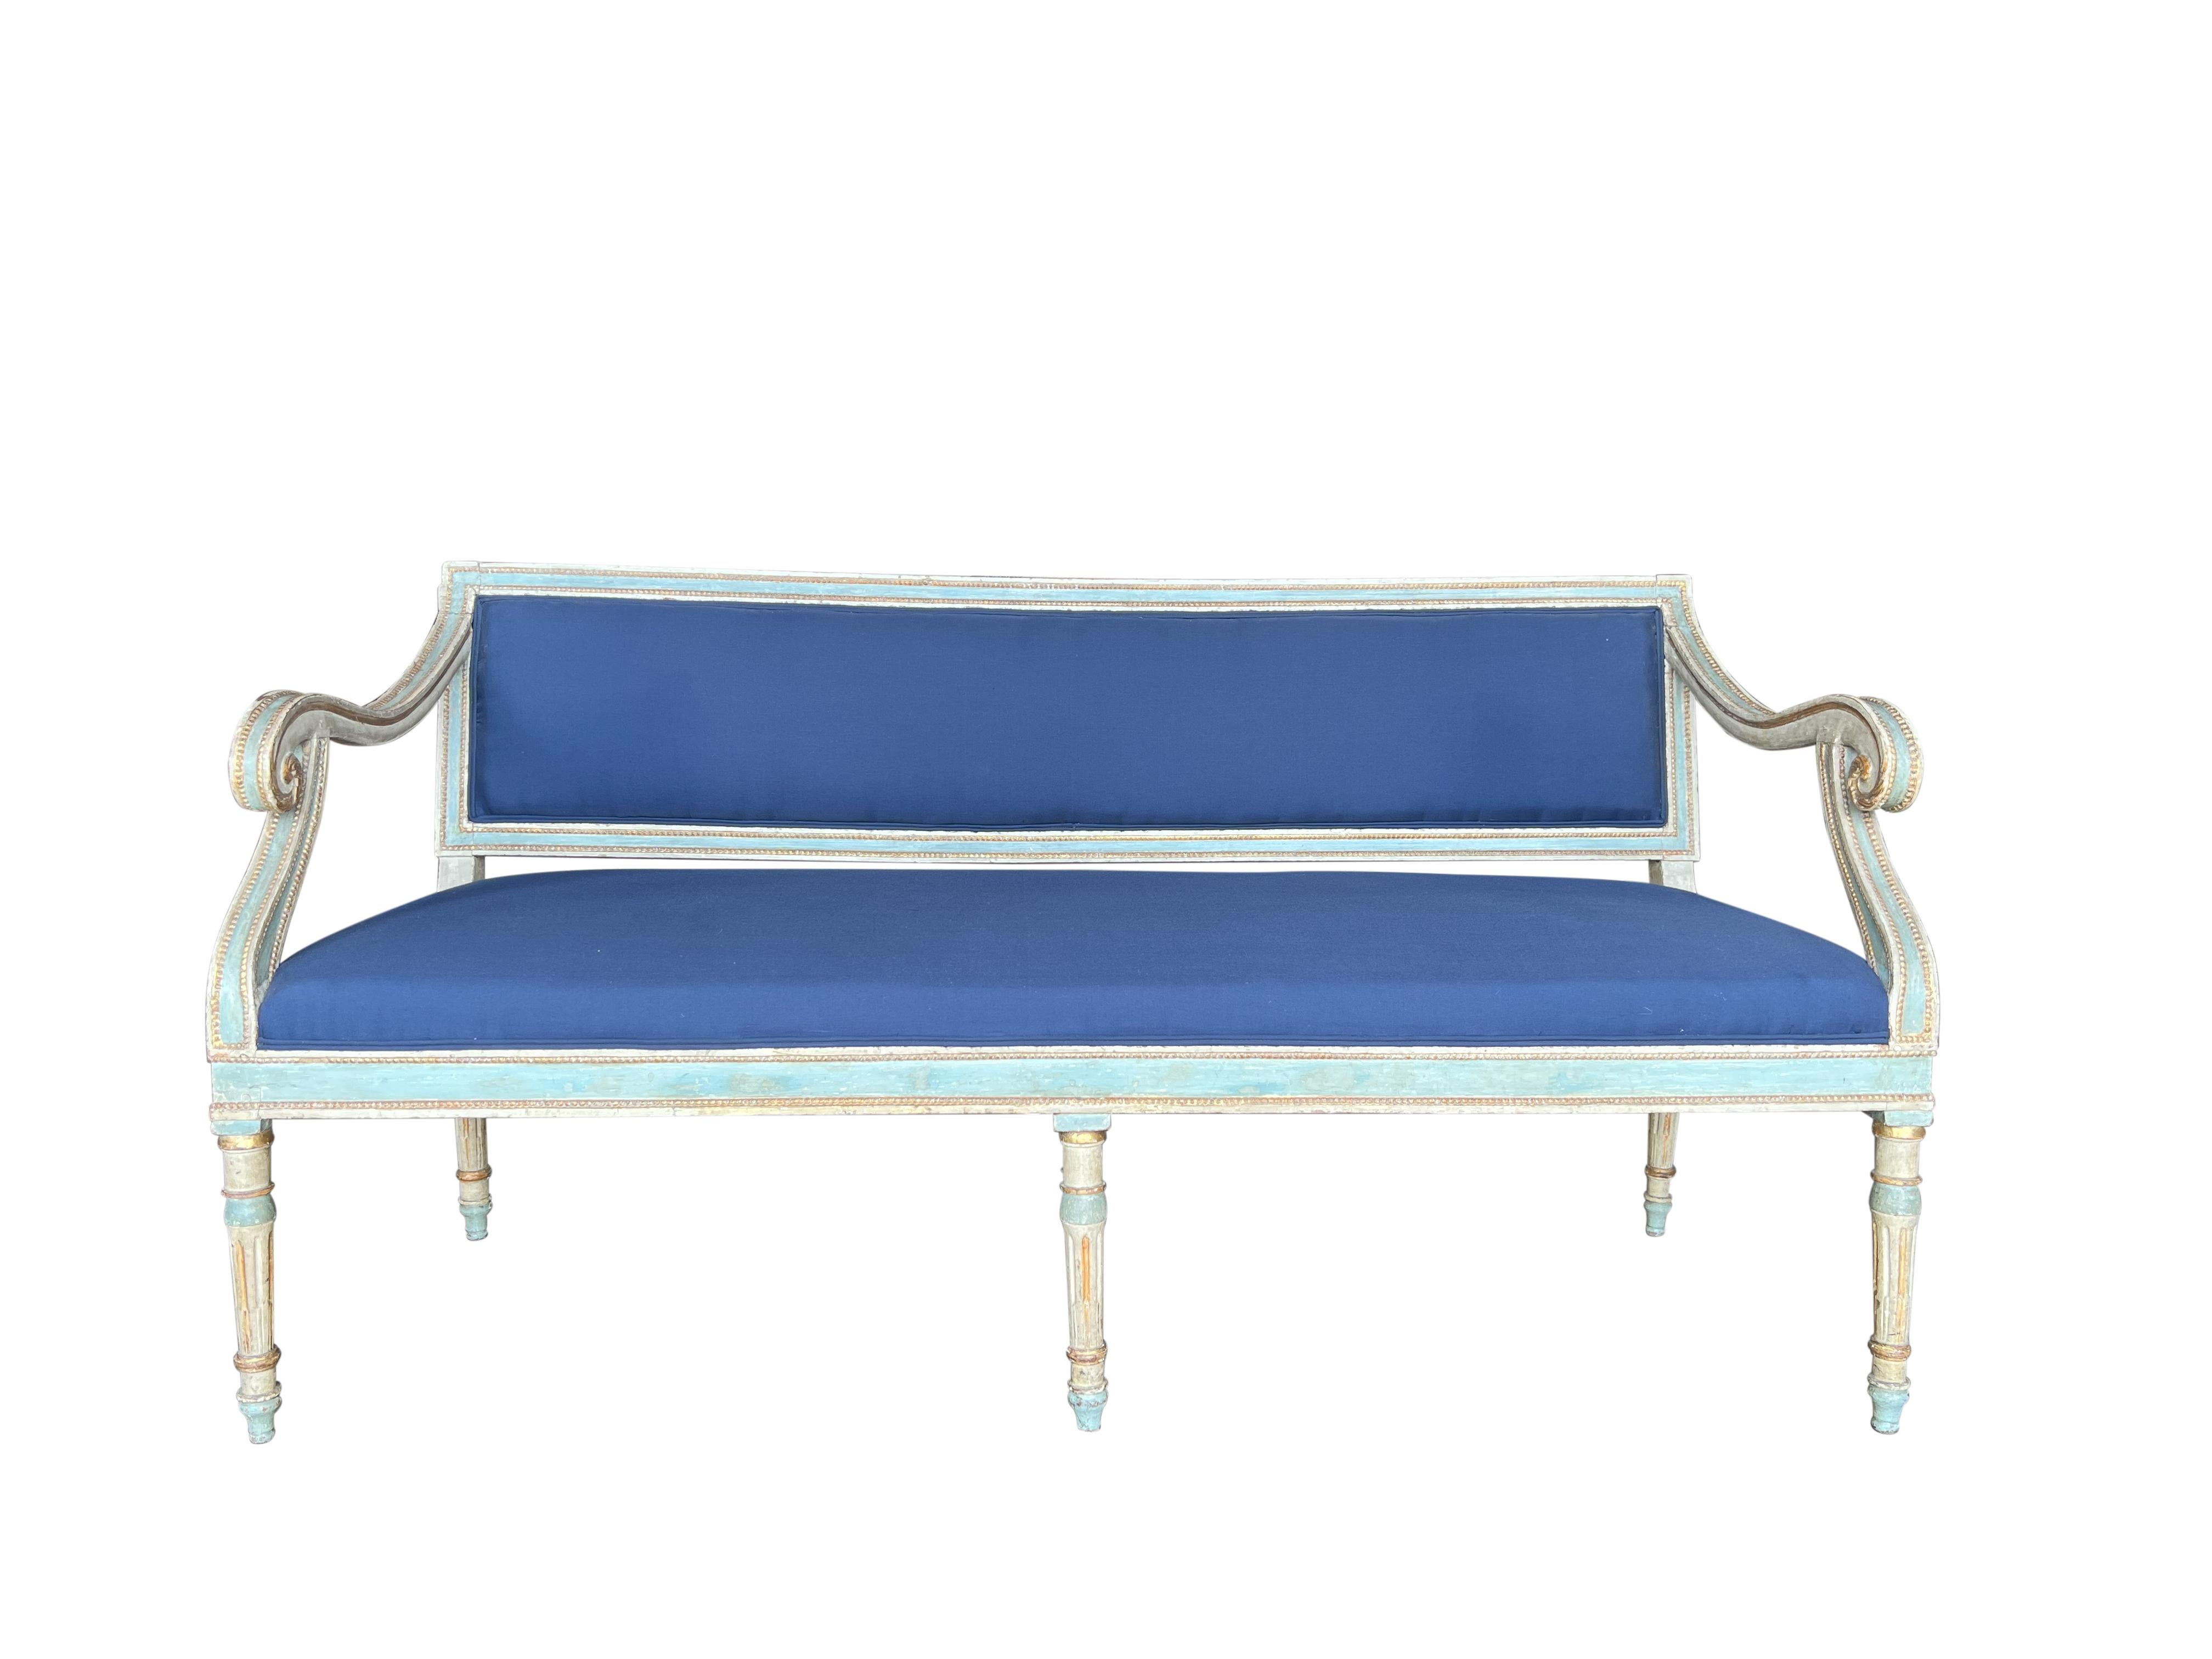 Italian Louis XVI style hall bench settee with sweeping arms, and 6 fluted legs. Antique beige and soft blue 2-tone patina highlighted by gold gilt details, Tuscany, circa 1820.  Professionally prepared for re-upholstery with restrung seat